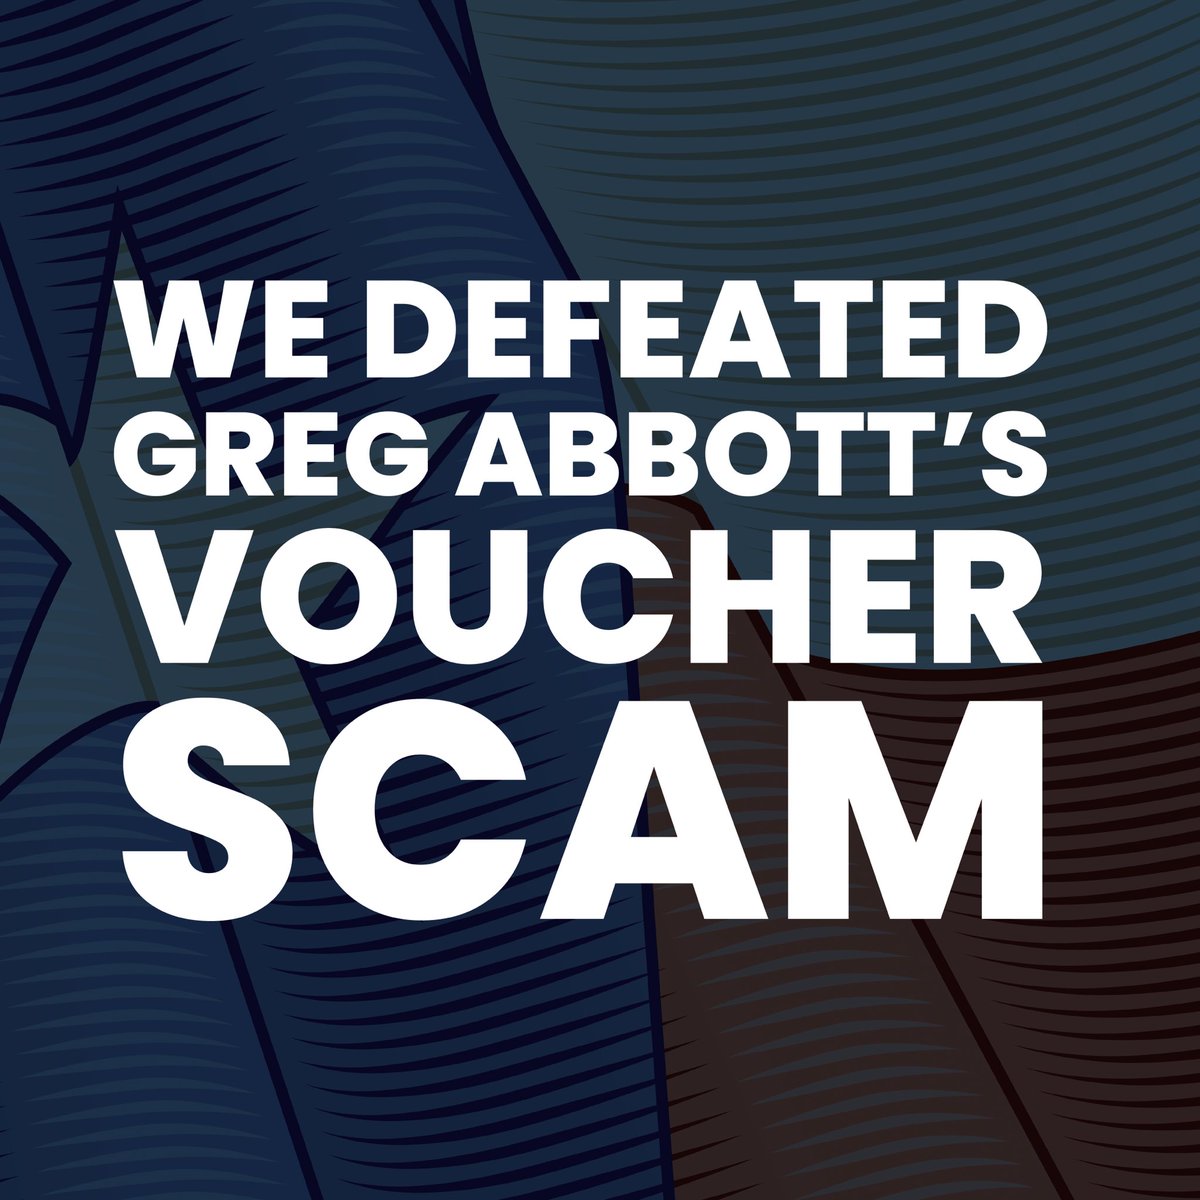 Today, a bipartisan majority in the Texas House DEFEATED Greg Abbott’s voucher scam — once and for all. Abbott and his billionaire mega-donors tried and failed to sell out our kids. Now, it’s time to fully fund our public schools. #Txlege